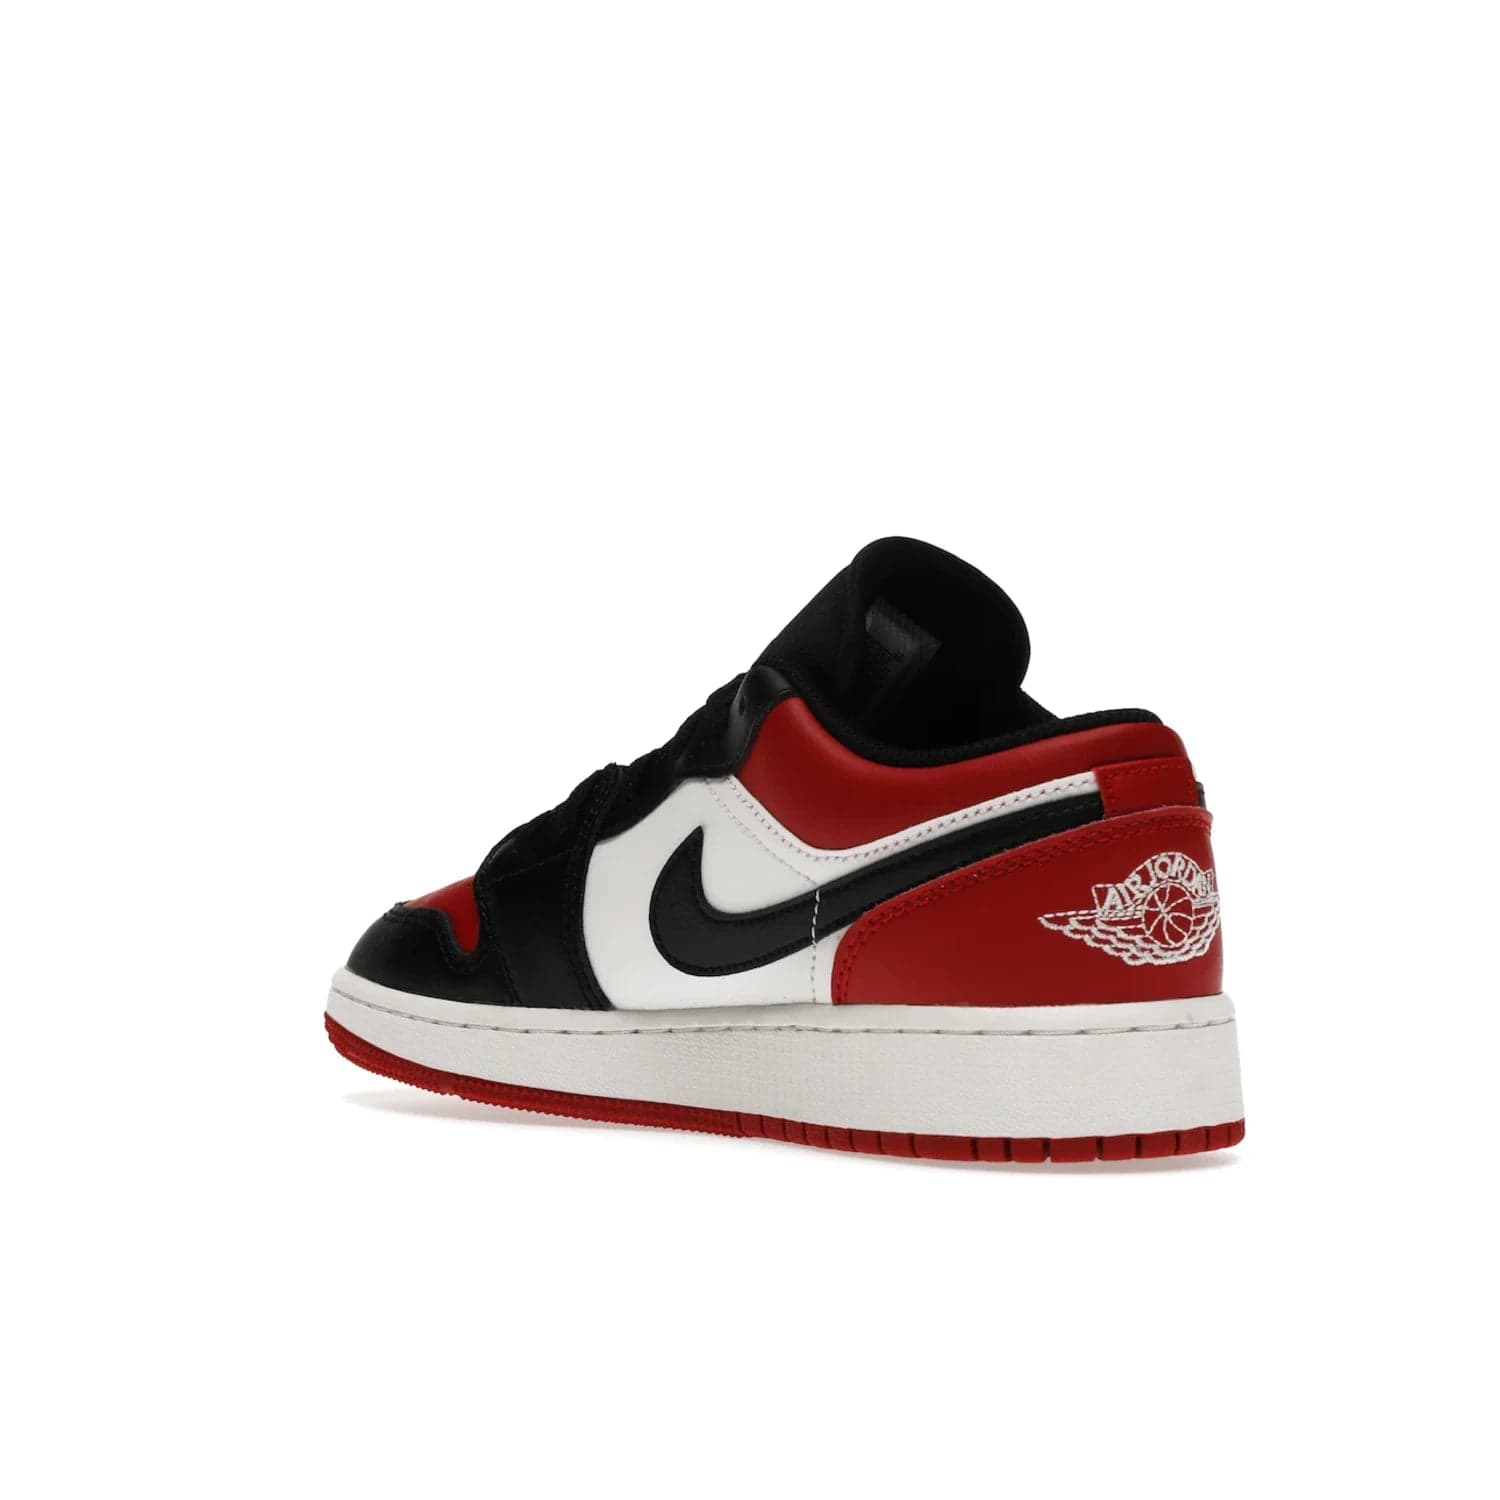 Jordan 1 Low Bred Toe (GS) - Image 24 - Only at www.BallersClubKickz.com - #
Iconic sneaker from Jordan brand with classic colorway, unique detailing & Air Jordan Wings logo. Step into the shoes of the greats with the Jordan 1 Low Bred Toe GS!